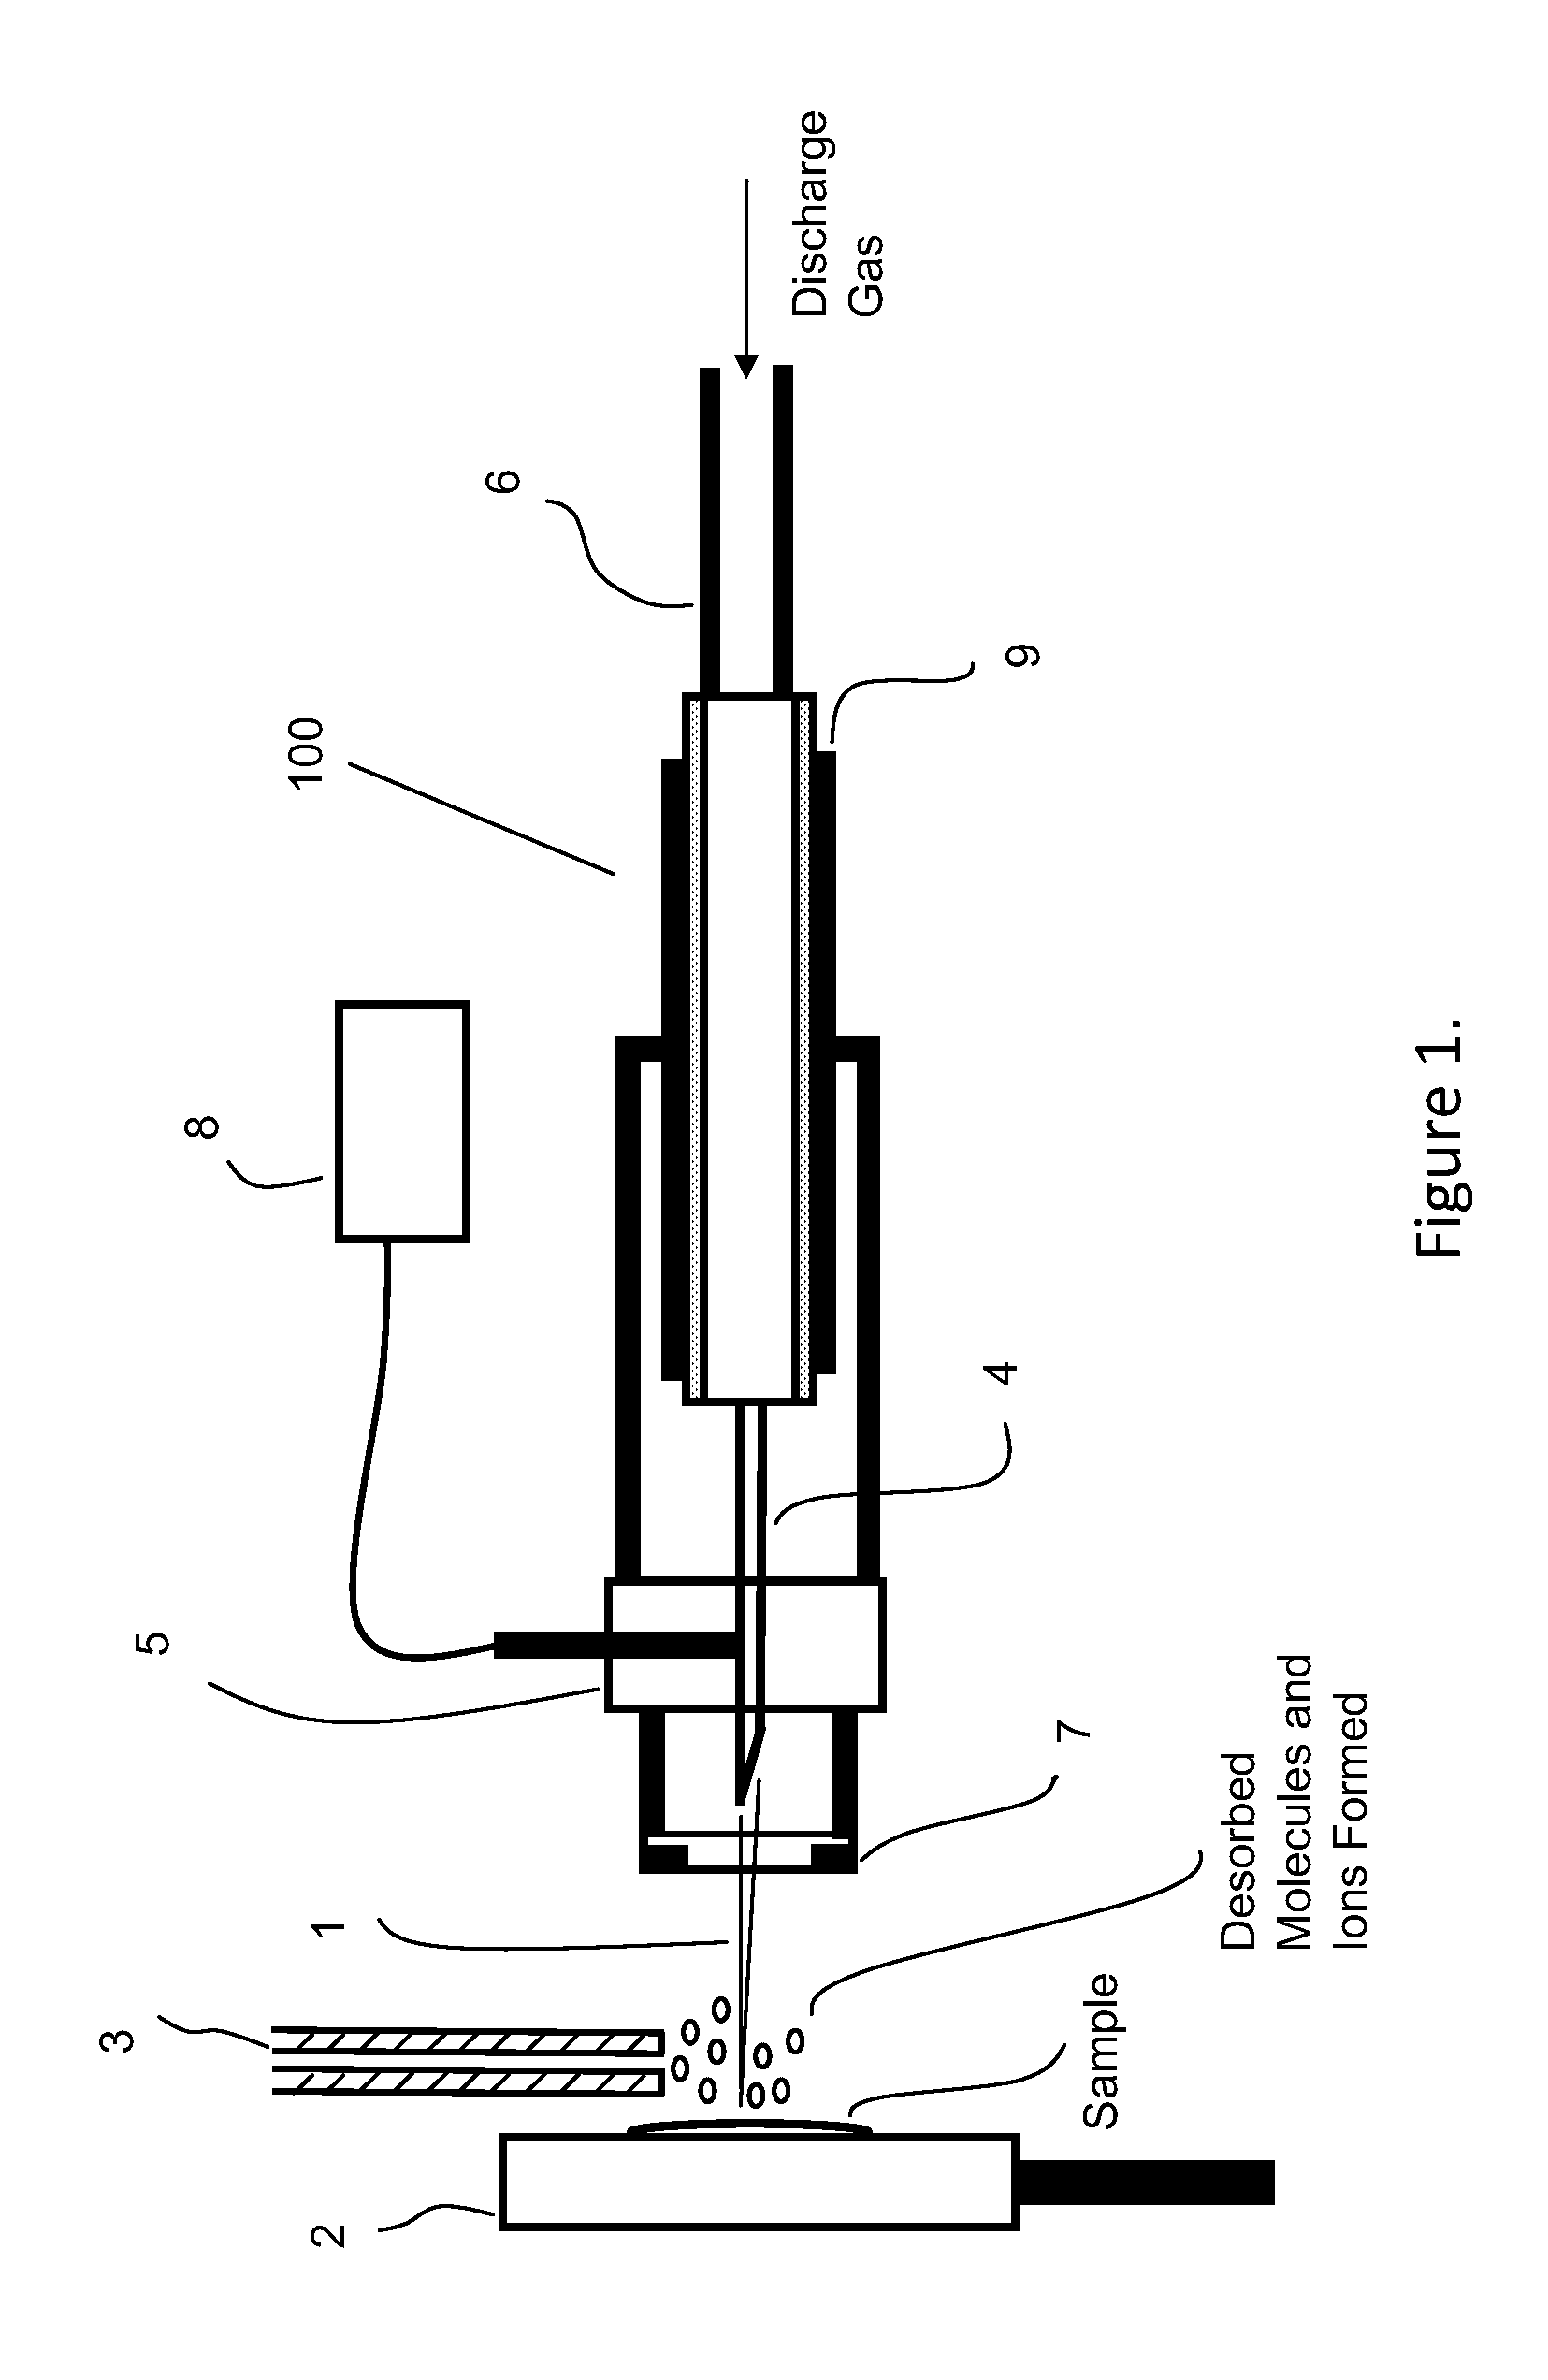 Device for desorption and ionization